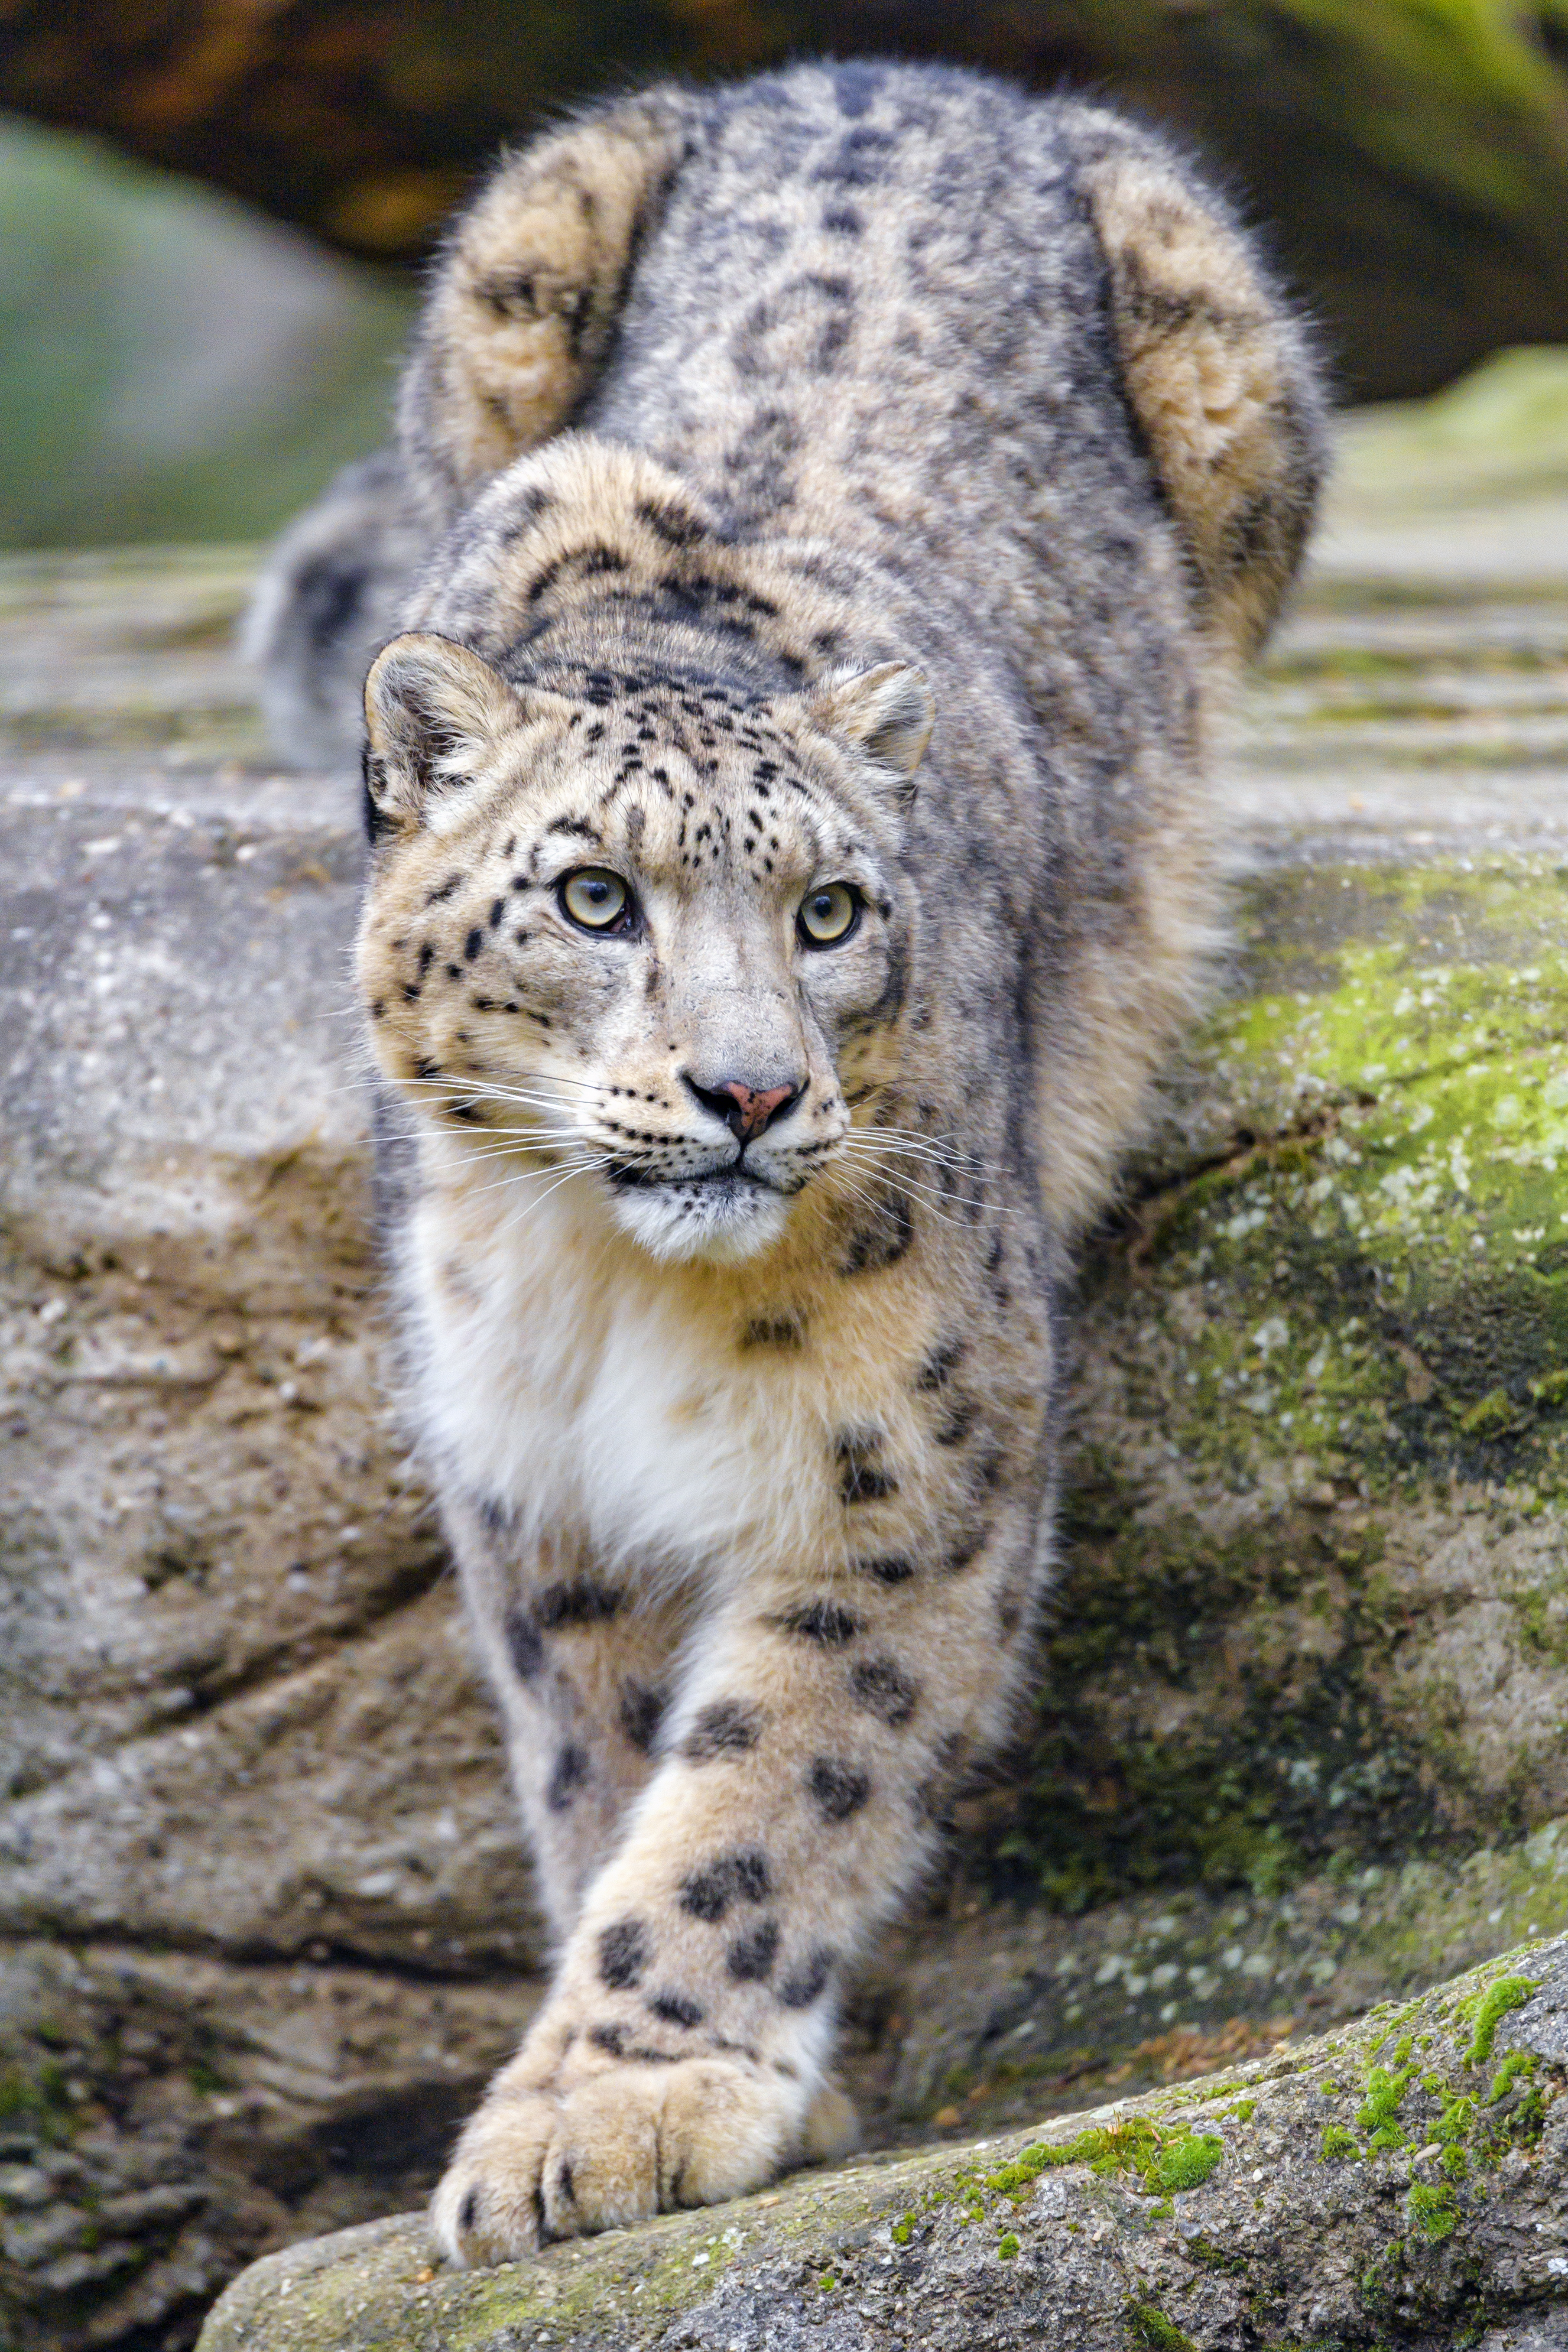 137343 download wallpaper snow leopard, animals, predator, big cat, sight, opinion, animal, irbis screensavers and pictures for free